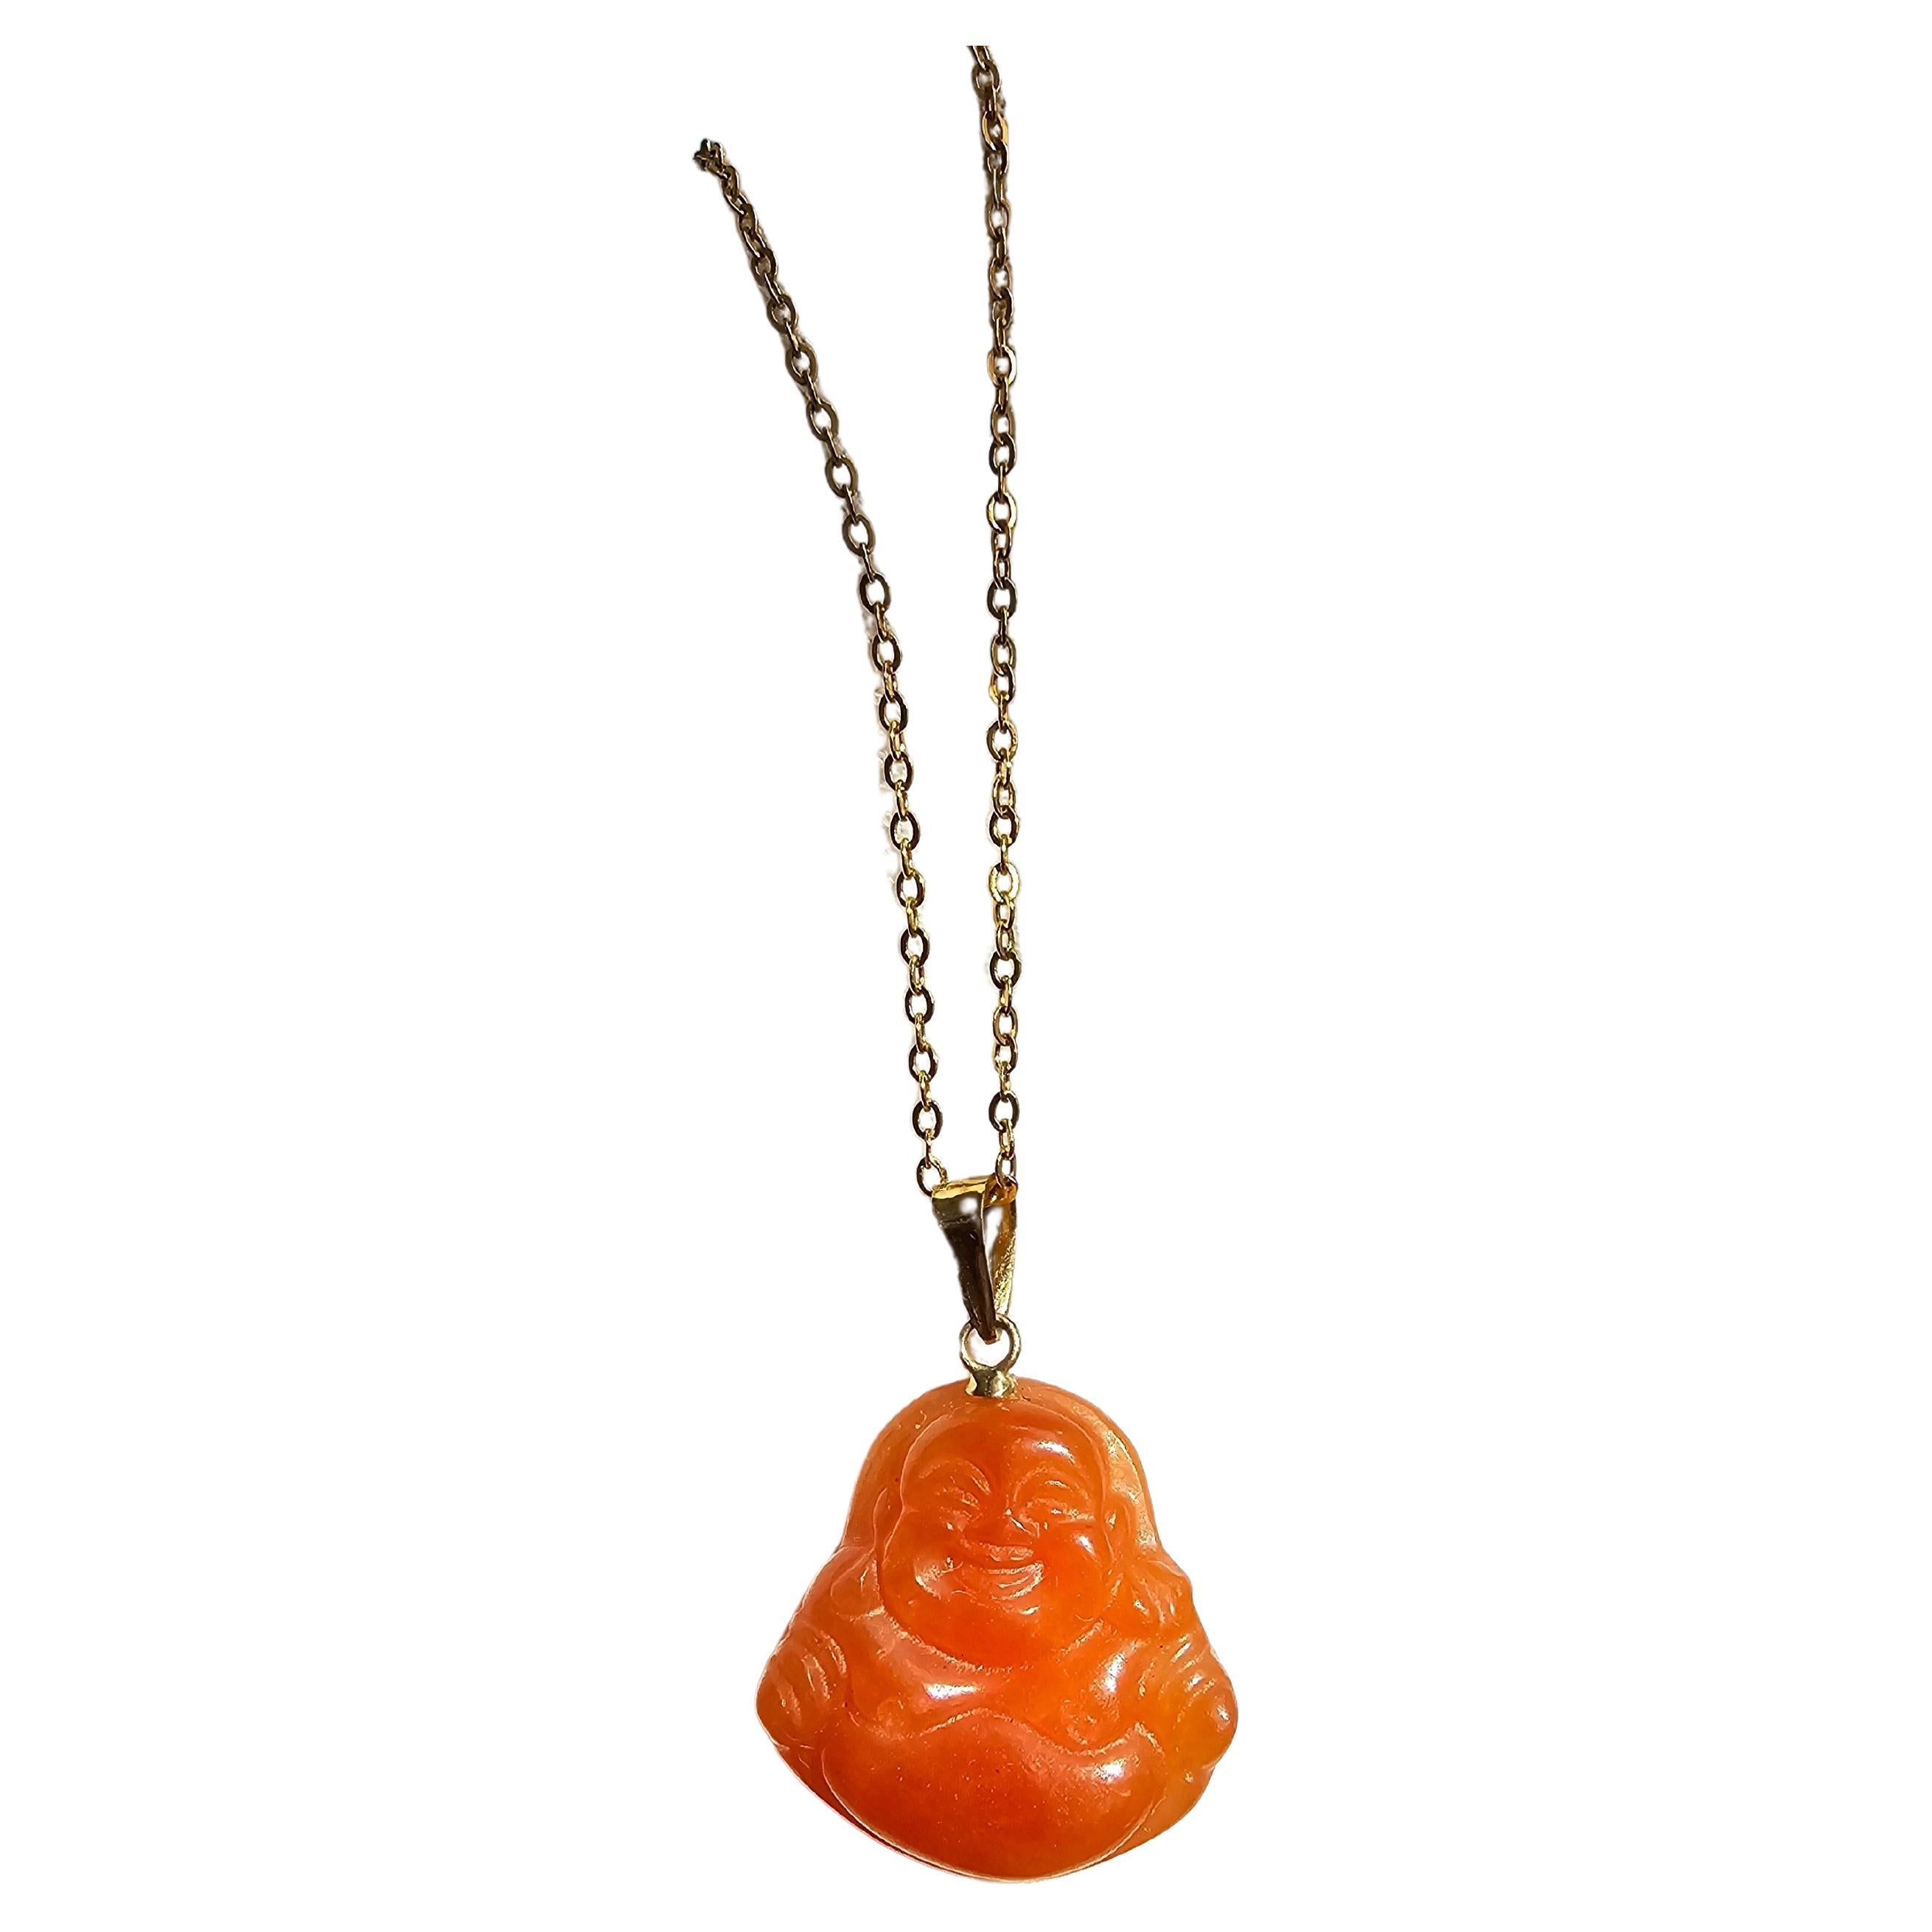 The 'Cha'an Hong Red Jade Laughing Buddha Pendant' takes inspiration from the traditional laughing Buddha figure that originates from Zhejiang. This iteration portrays Gautama Buddha laughing yet with a peaceful demeanor.

Made out of Red Jade with